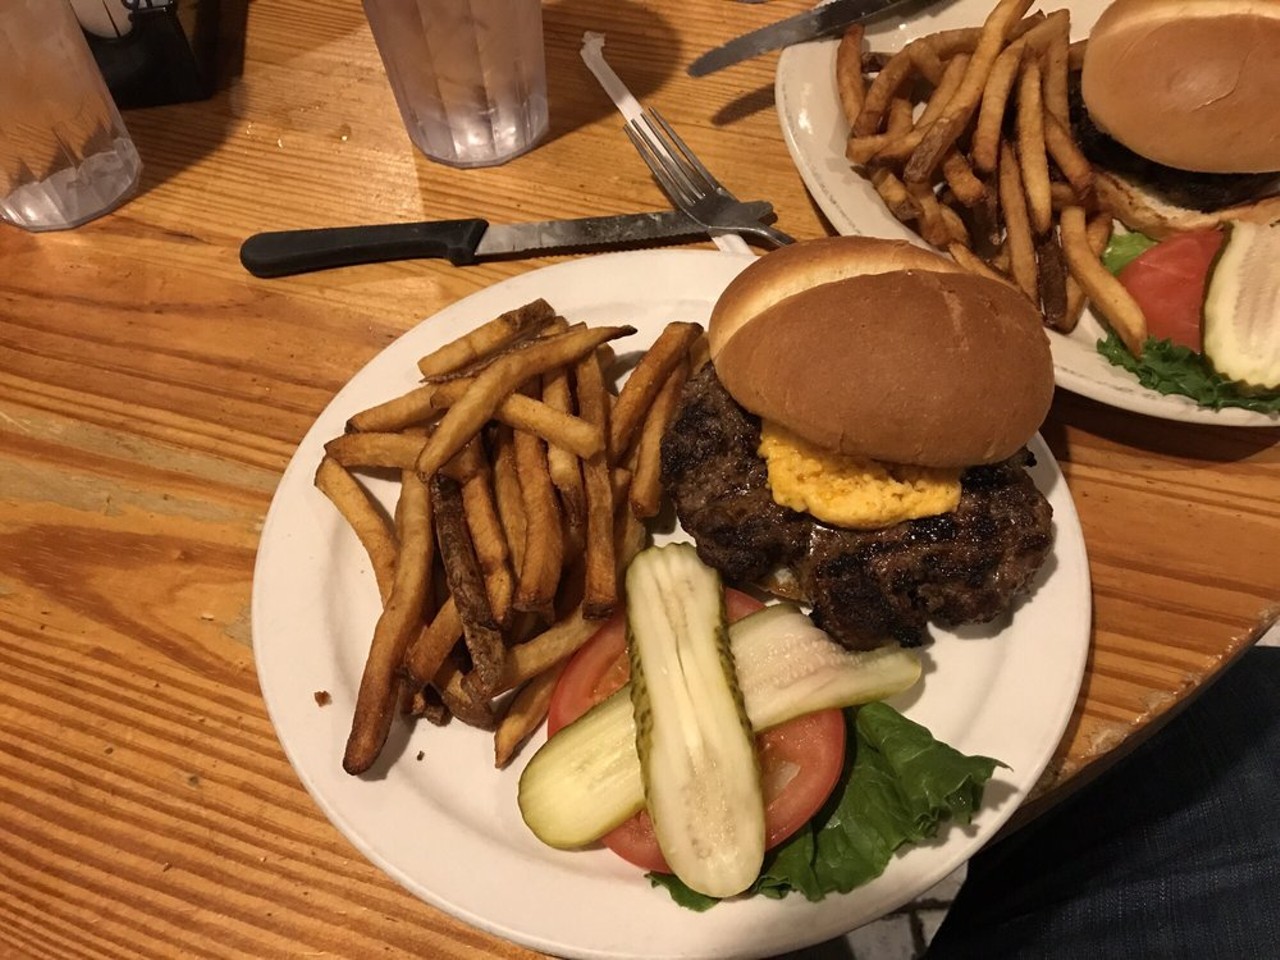 #21: Michael&#146;s Bar and Grill
(7101 Manchester Avenue; 314-644-2240)
Read what Yelpers have to say here.
Photo credit: Jason P. via Yelp